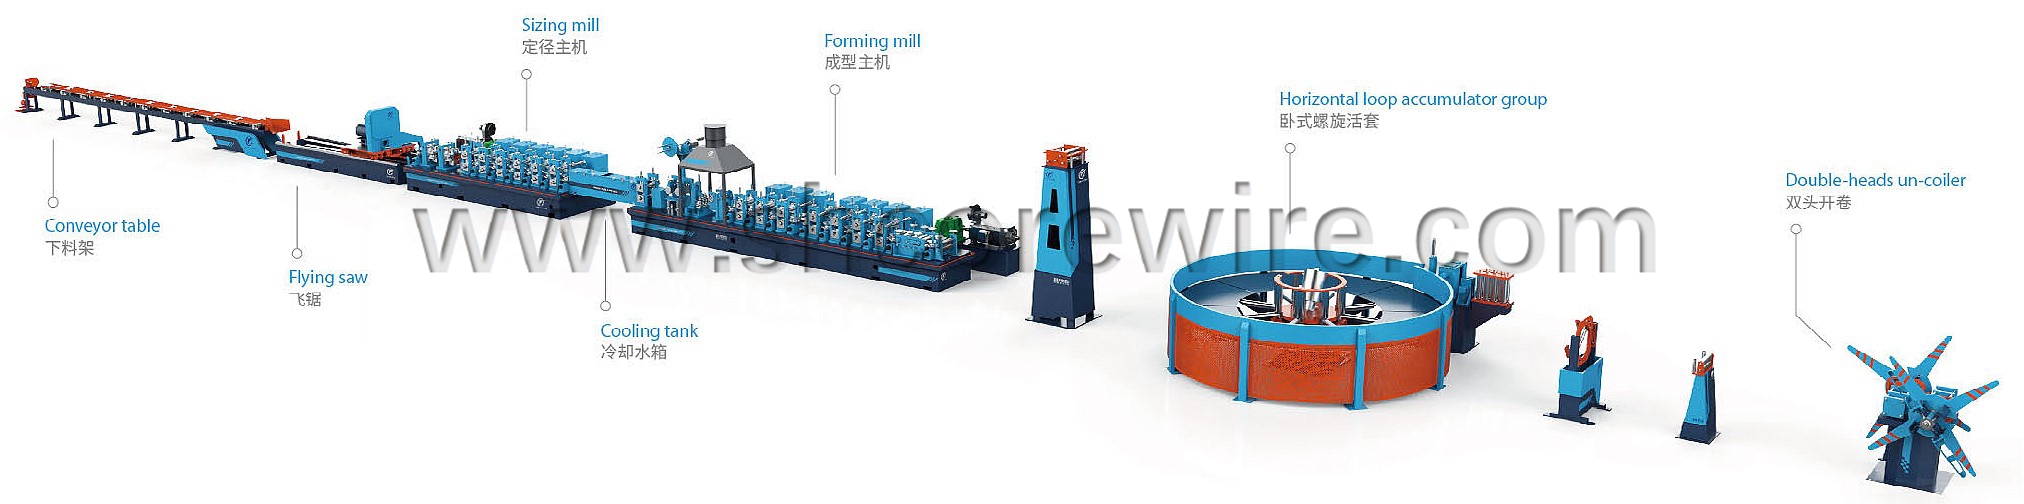 tube-mill-flow-chairt